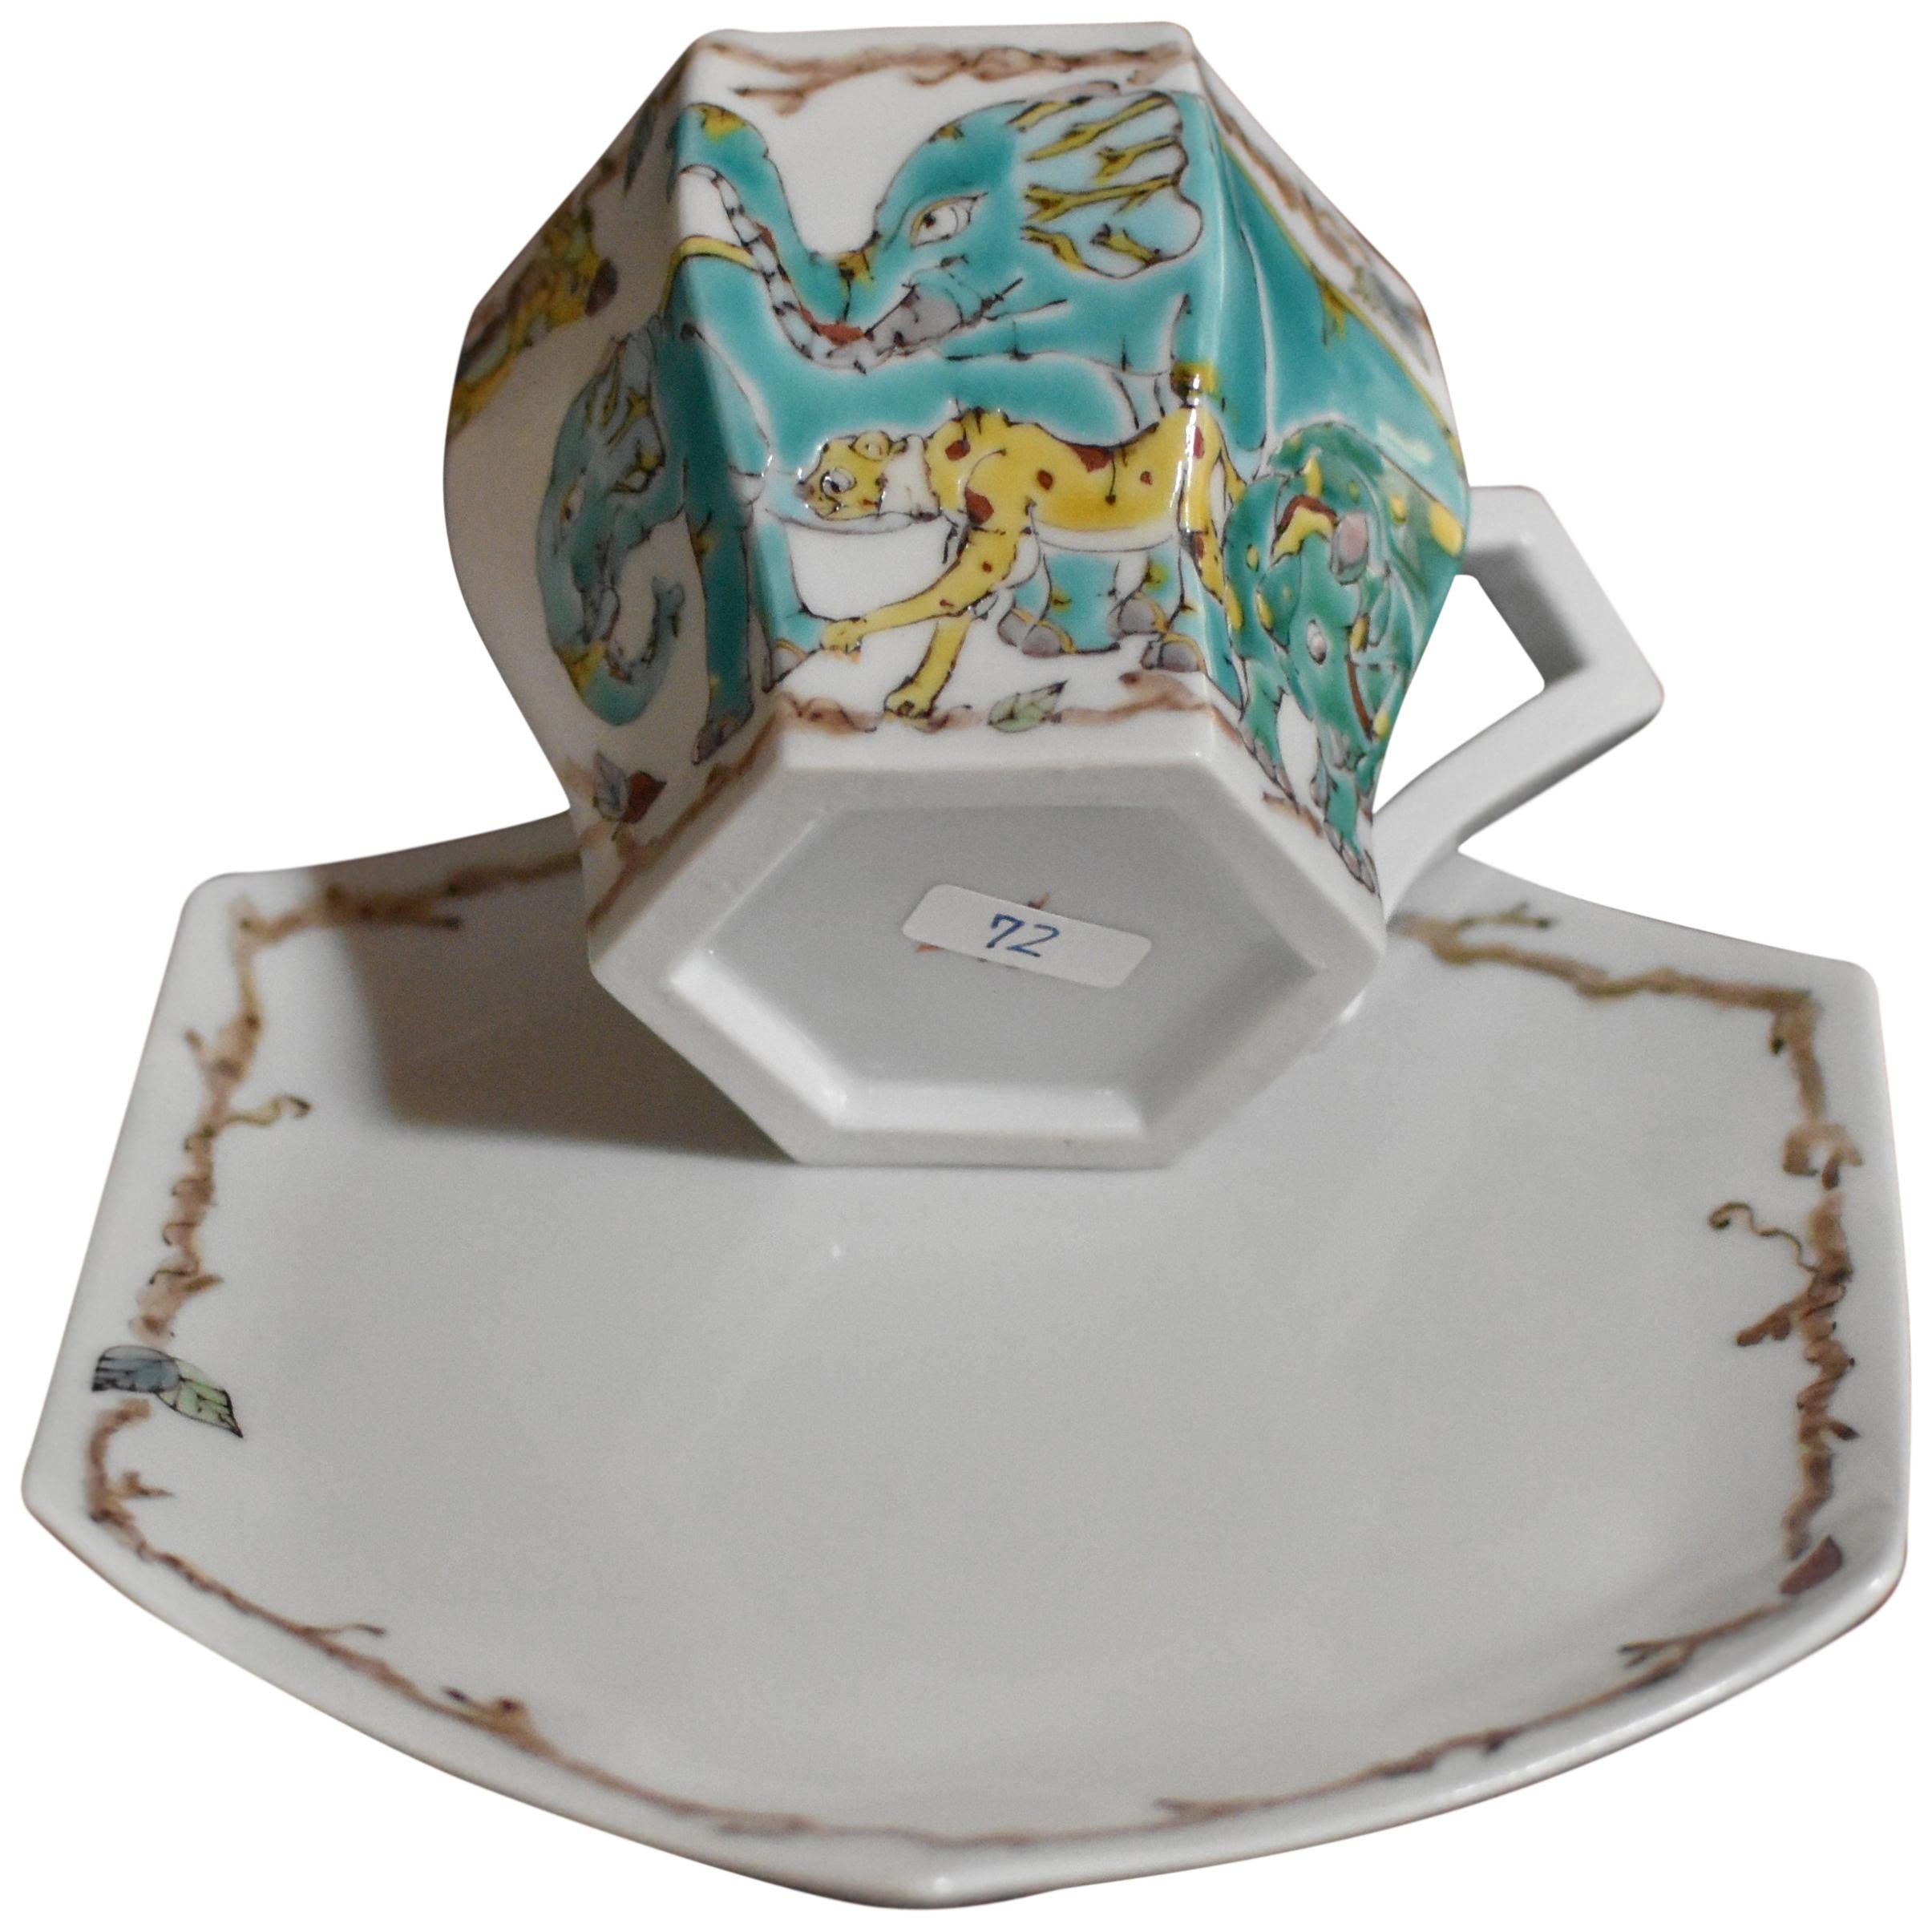 Contemporary Kutani Porcelain Hand-Painted Cup and Saucer by Master Artist